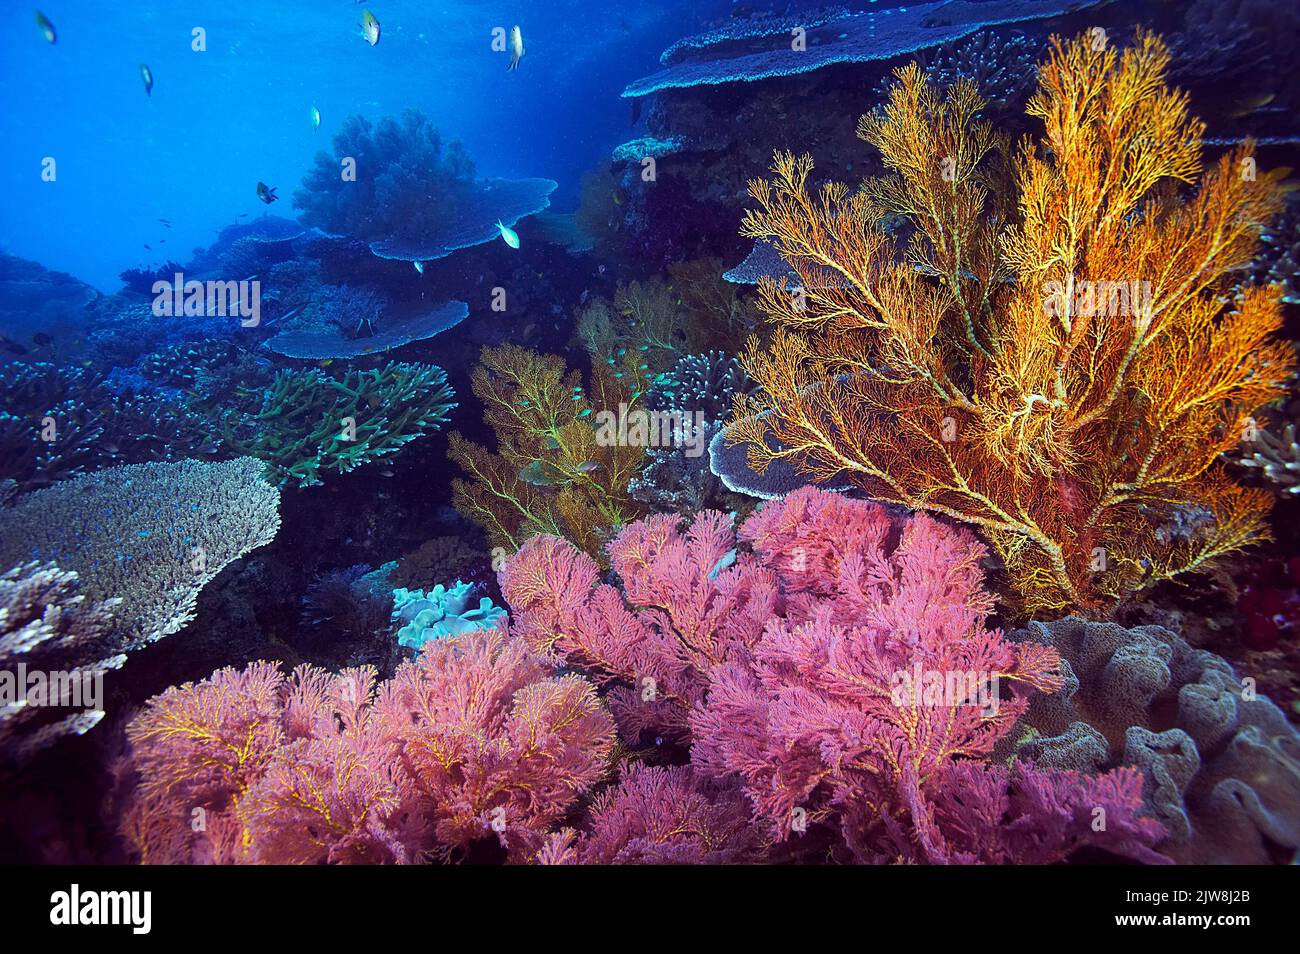 Colourful tropival coral reef with huge knotted fan coral (Melithaea ochracea) and table corals (Acropora cytherea), Komodo, Indonesia Stock Photo